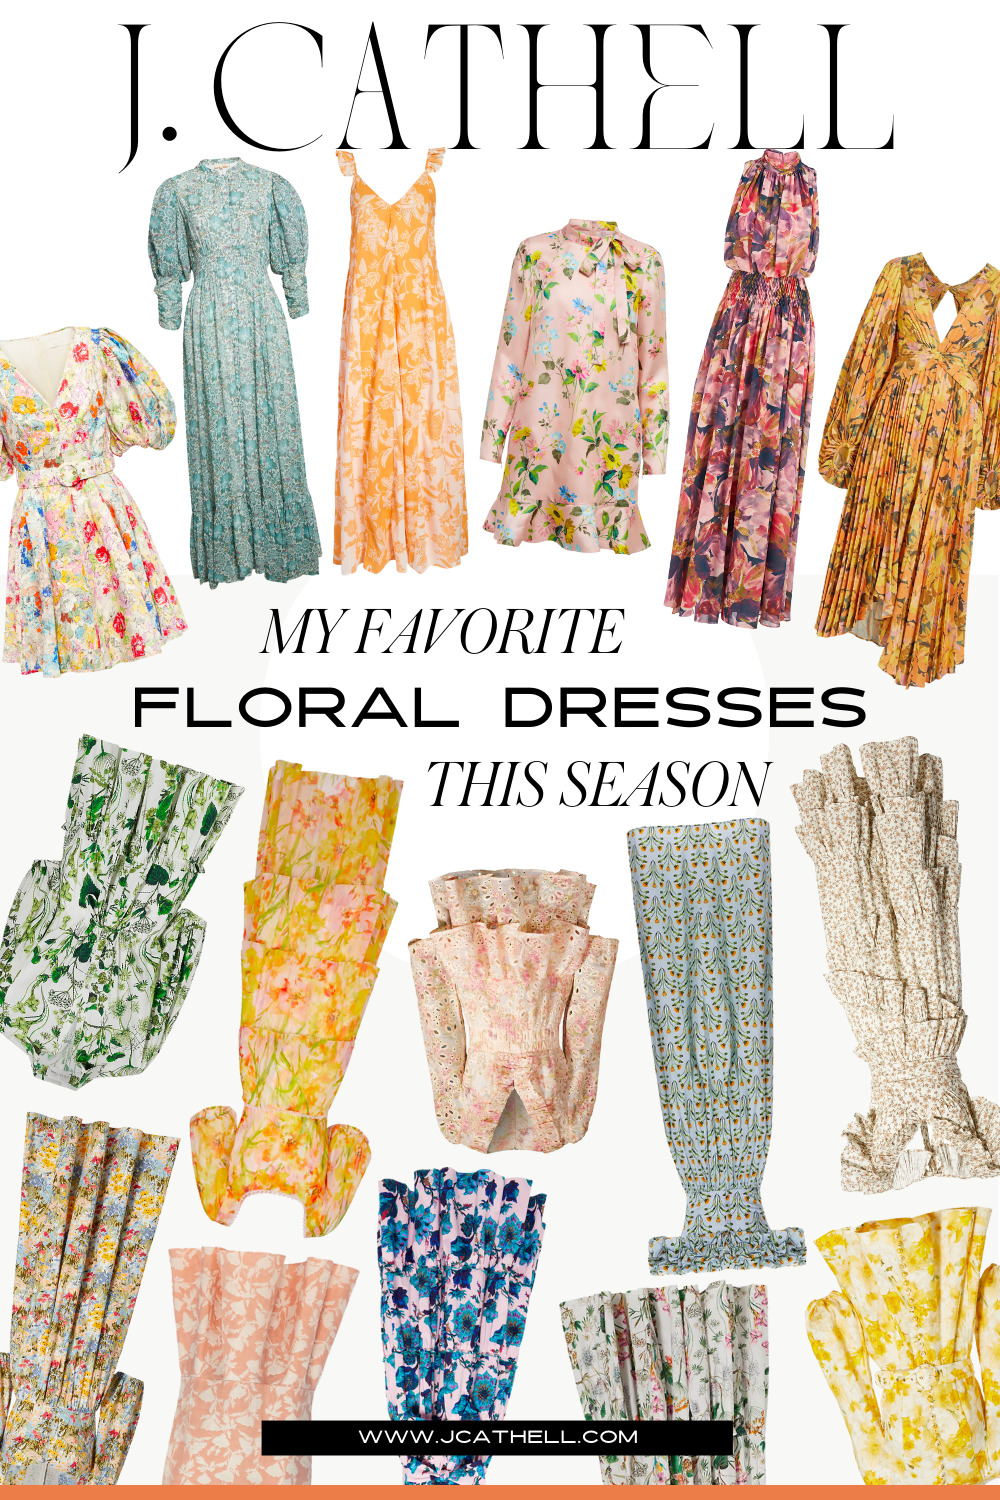 Cover image of curated spring, floral dresses